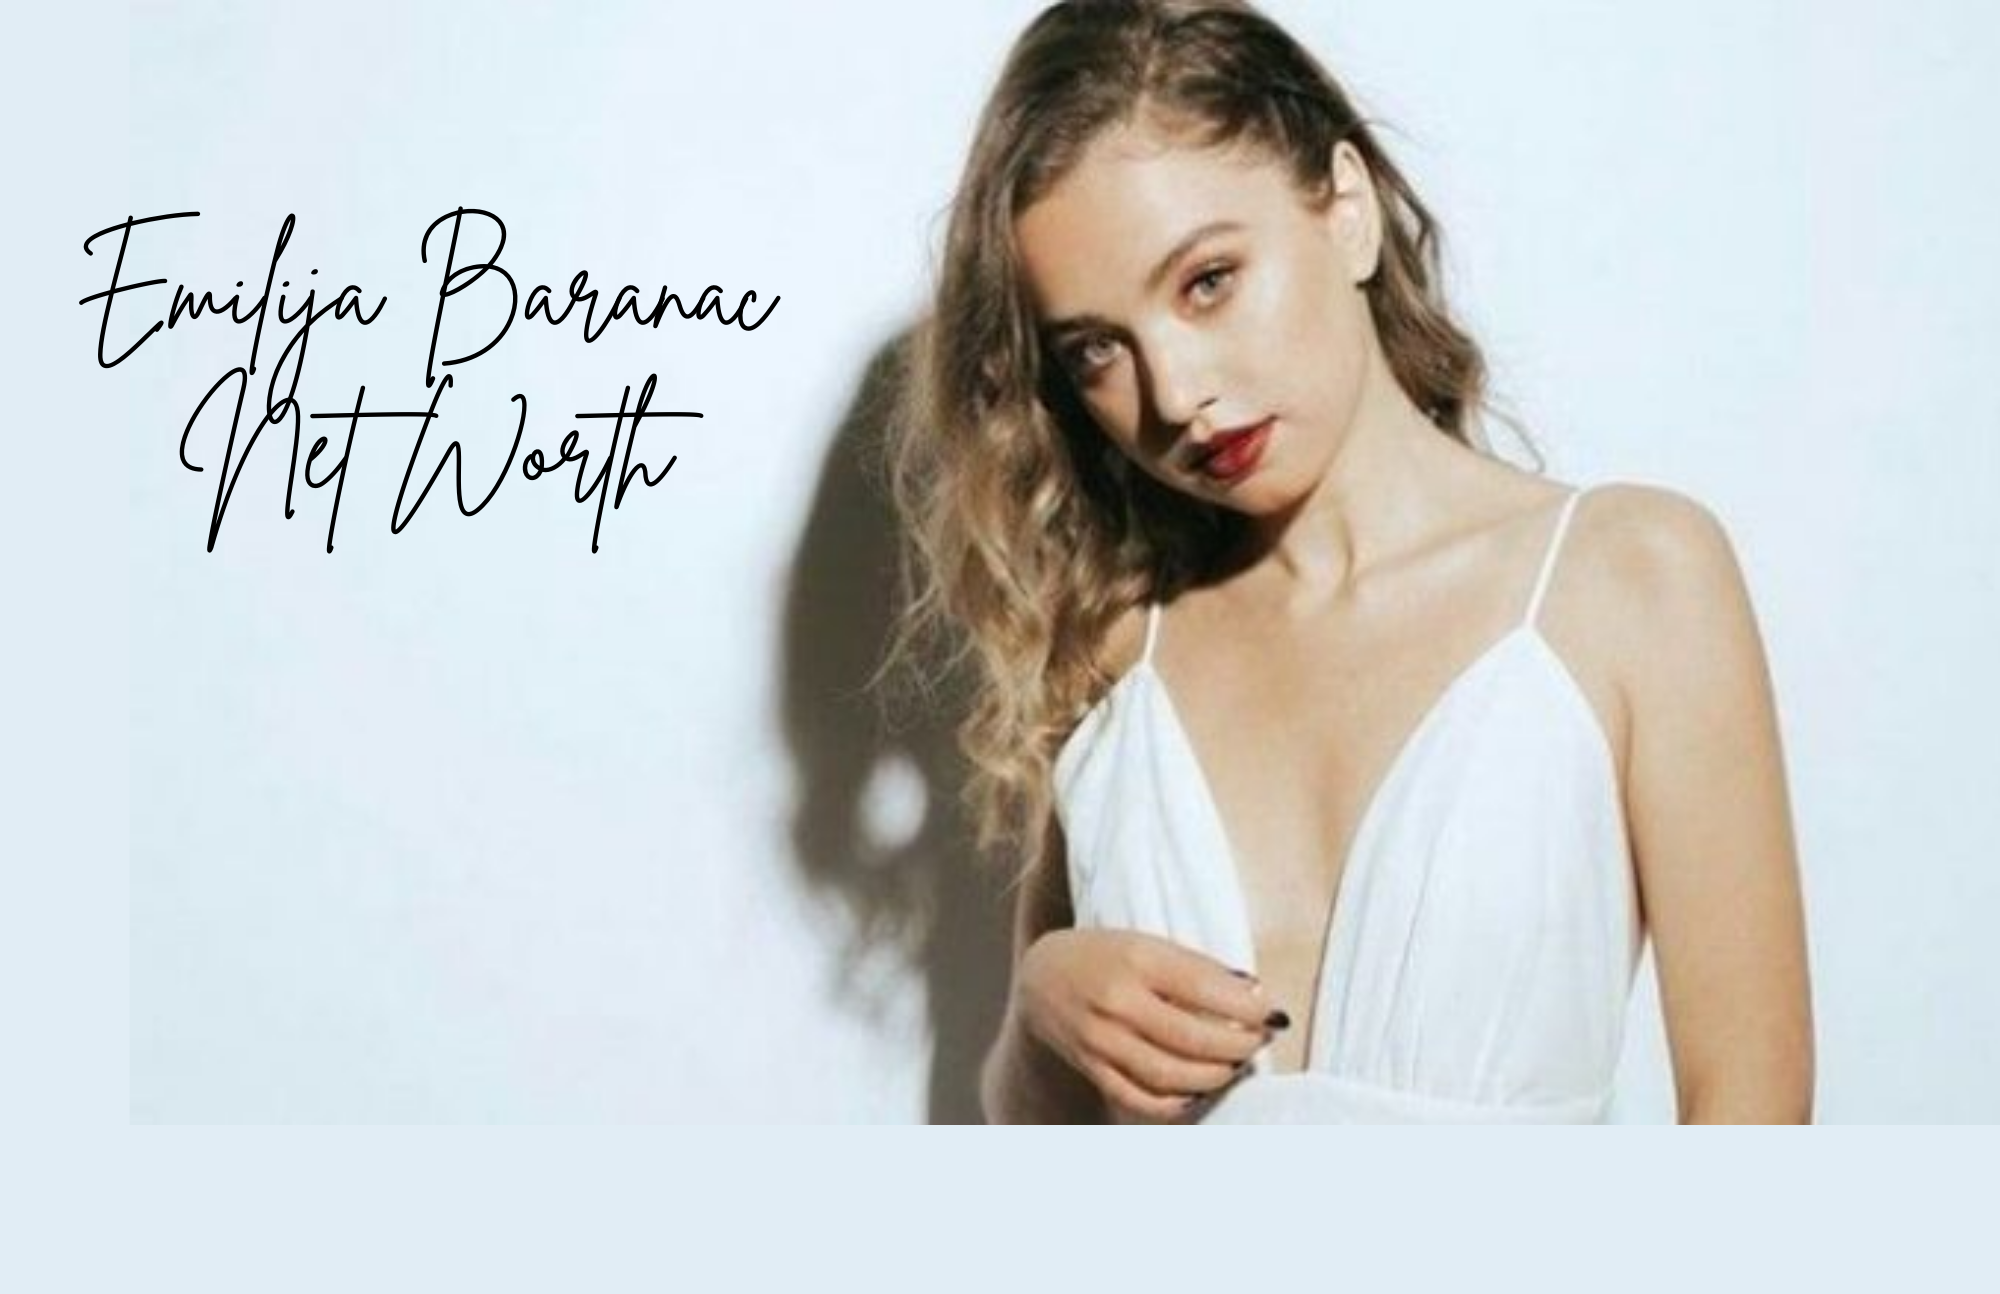 Emilija-baranac wearing white dress and red lips with her hair down